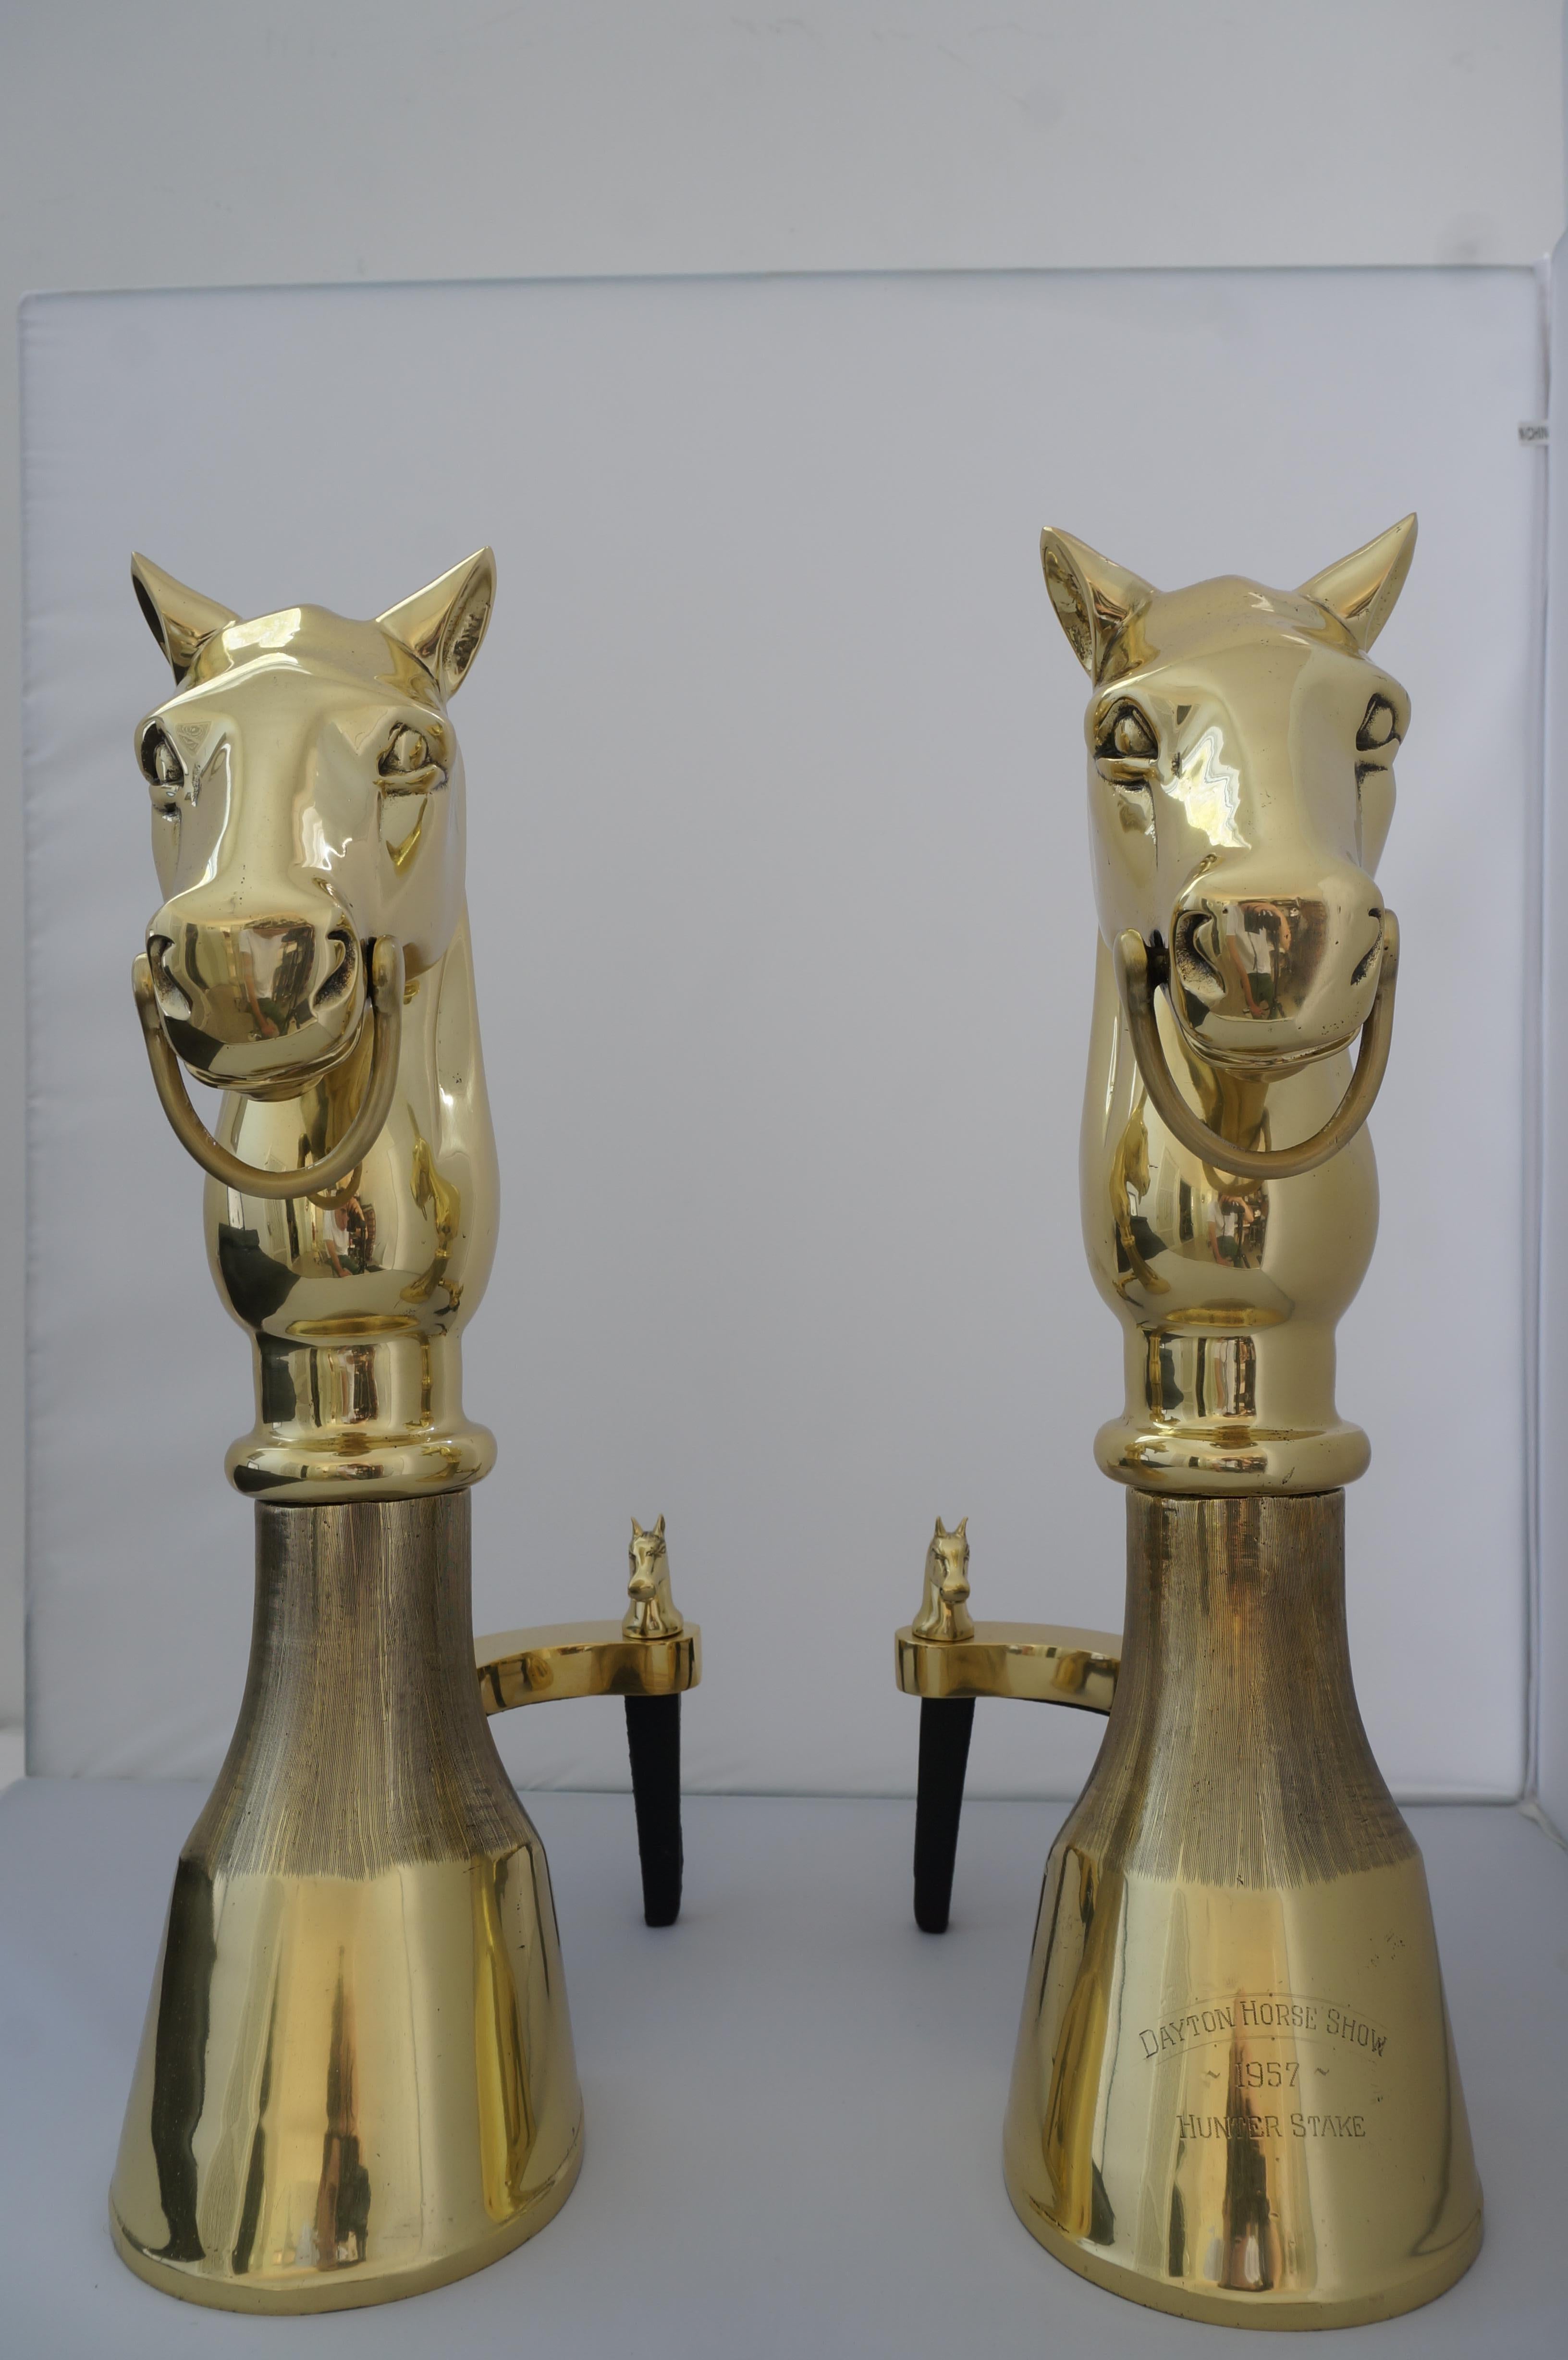 Mid-century chenets trophy hunter stakes 1957 dayton horse show in polished brass - a pair - from a Palm Beach estate.